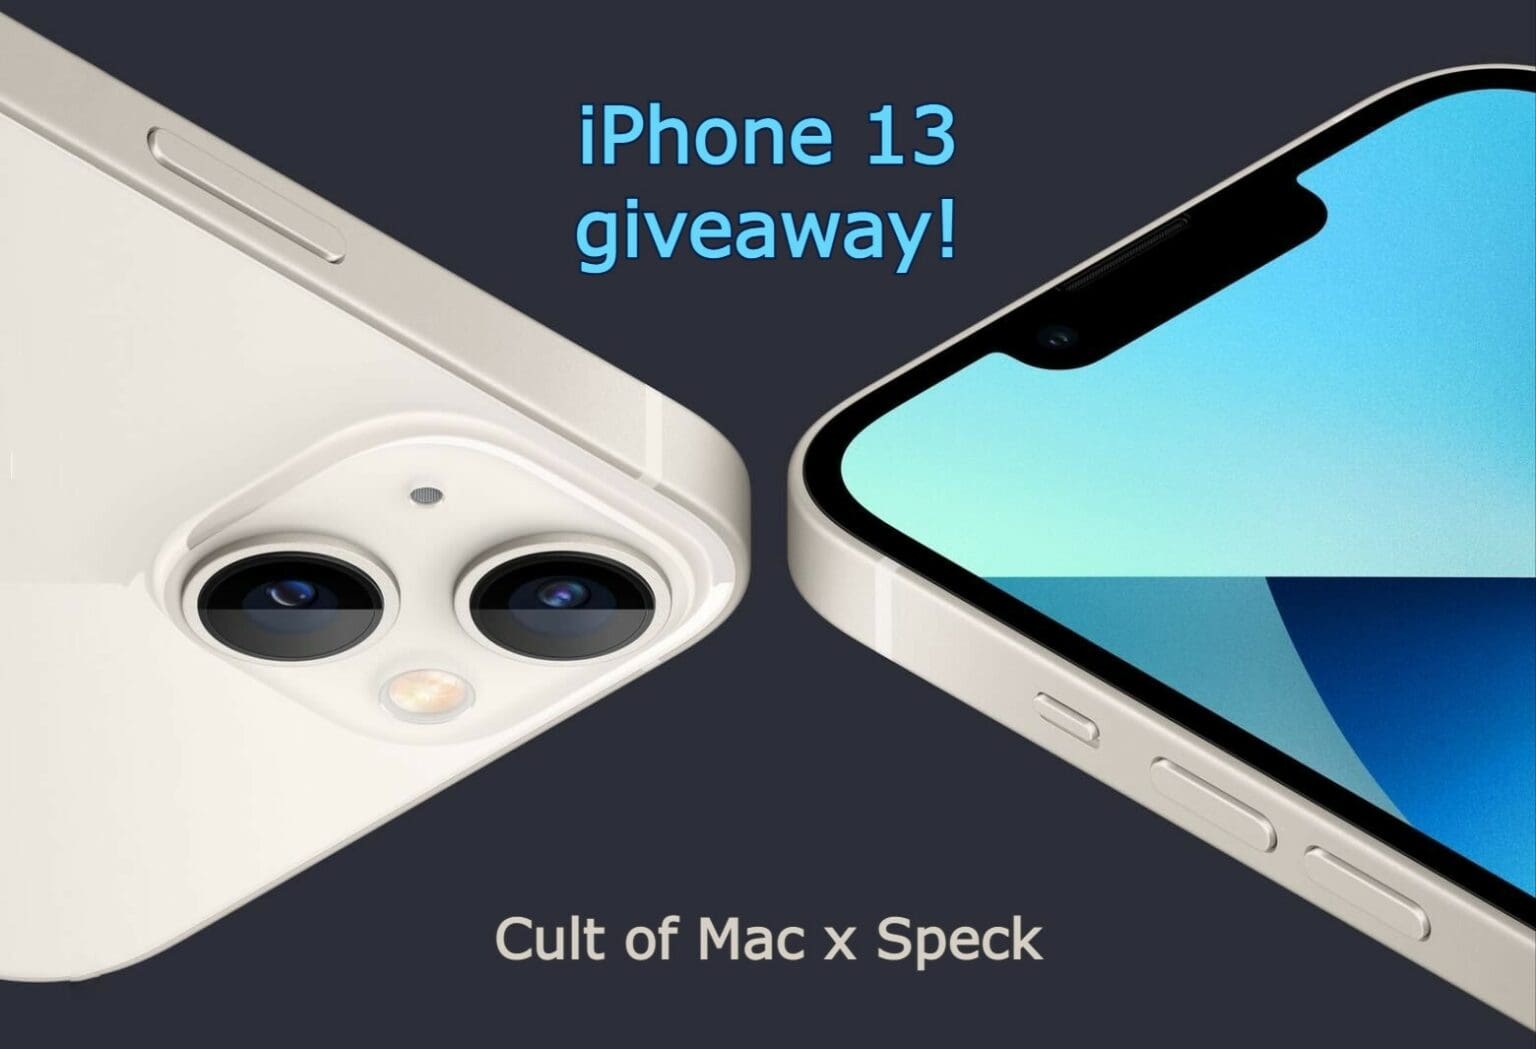 iPhone 13 giveaway: Cult of Mac x Speck: Enter for your chance to win an iPhone 13 and three awesome Speck cases.